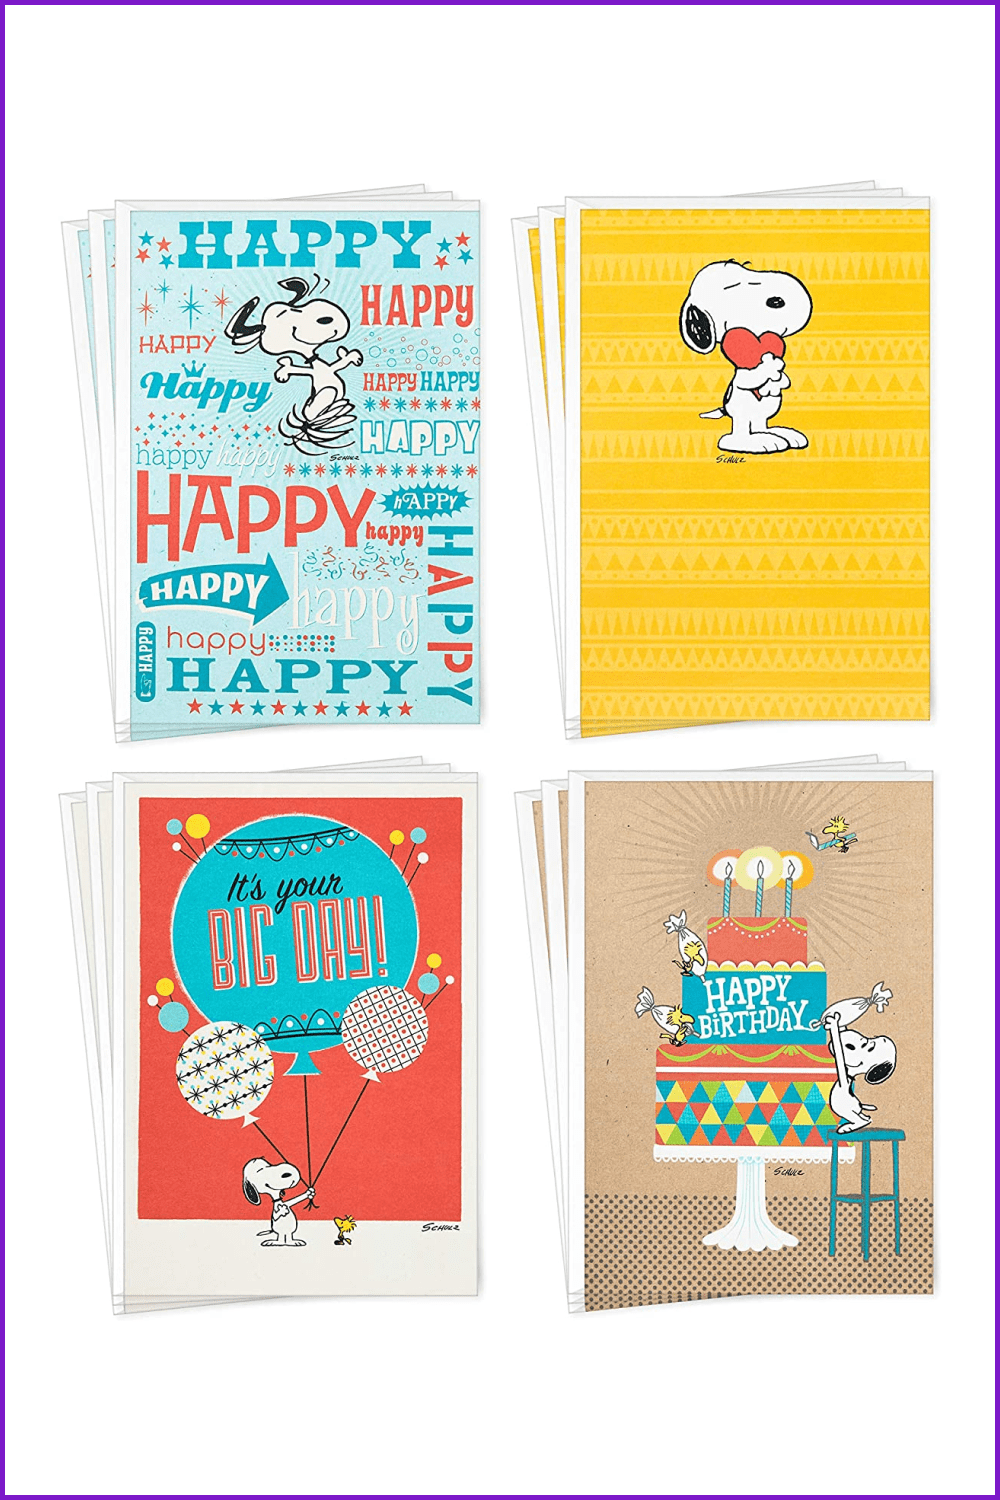 Collage of birthday cards with Snoopy and balloons, cakes.